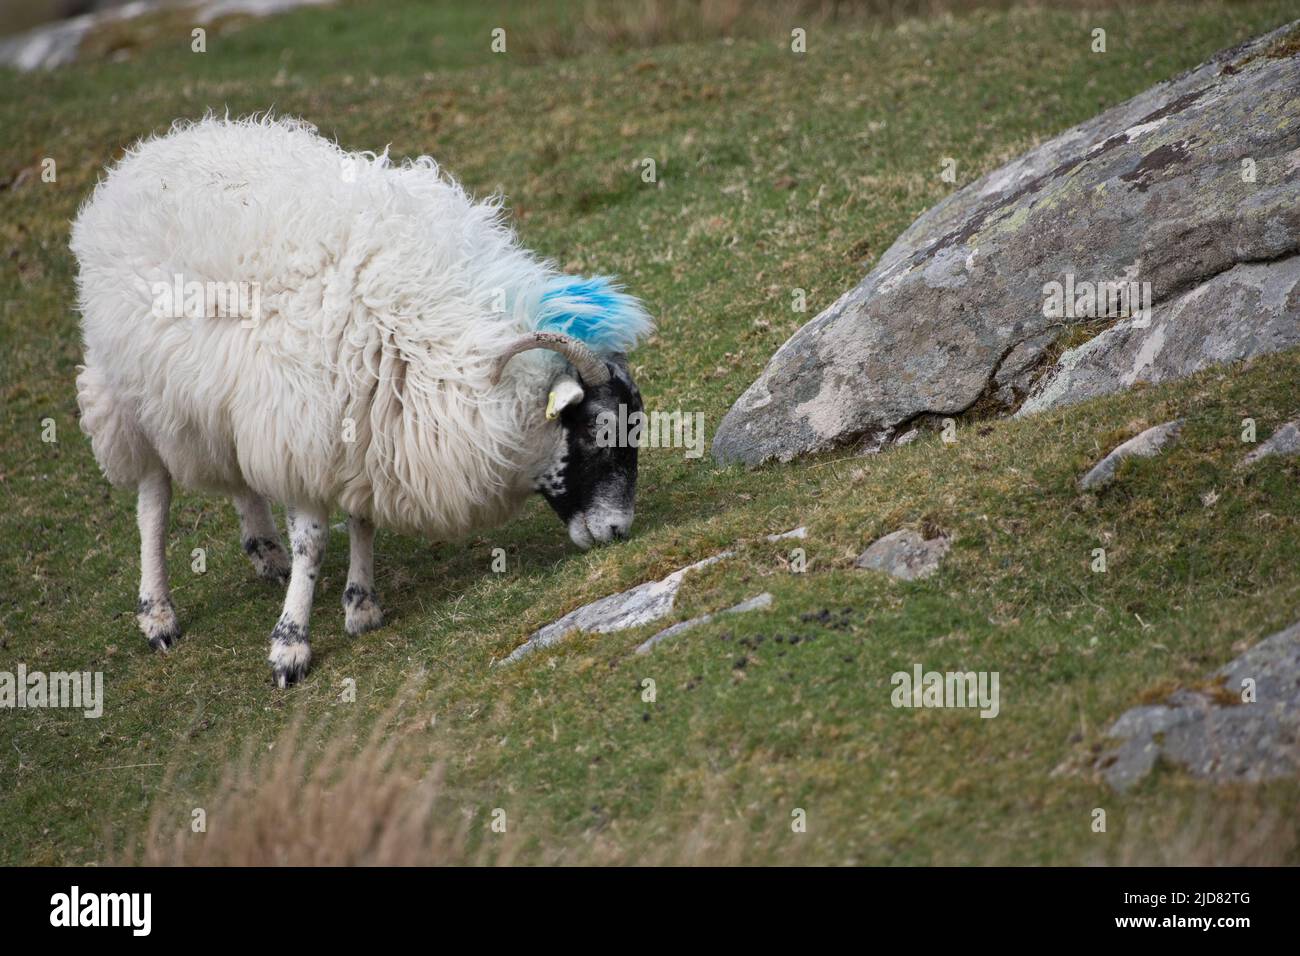 Upland sheep grazing in a grass field near Dun Carloway, Isle of Lewis, Outer Hebrides, Scotland, United Kingdom Stock Photo